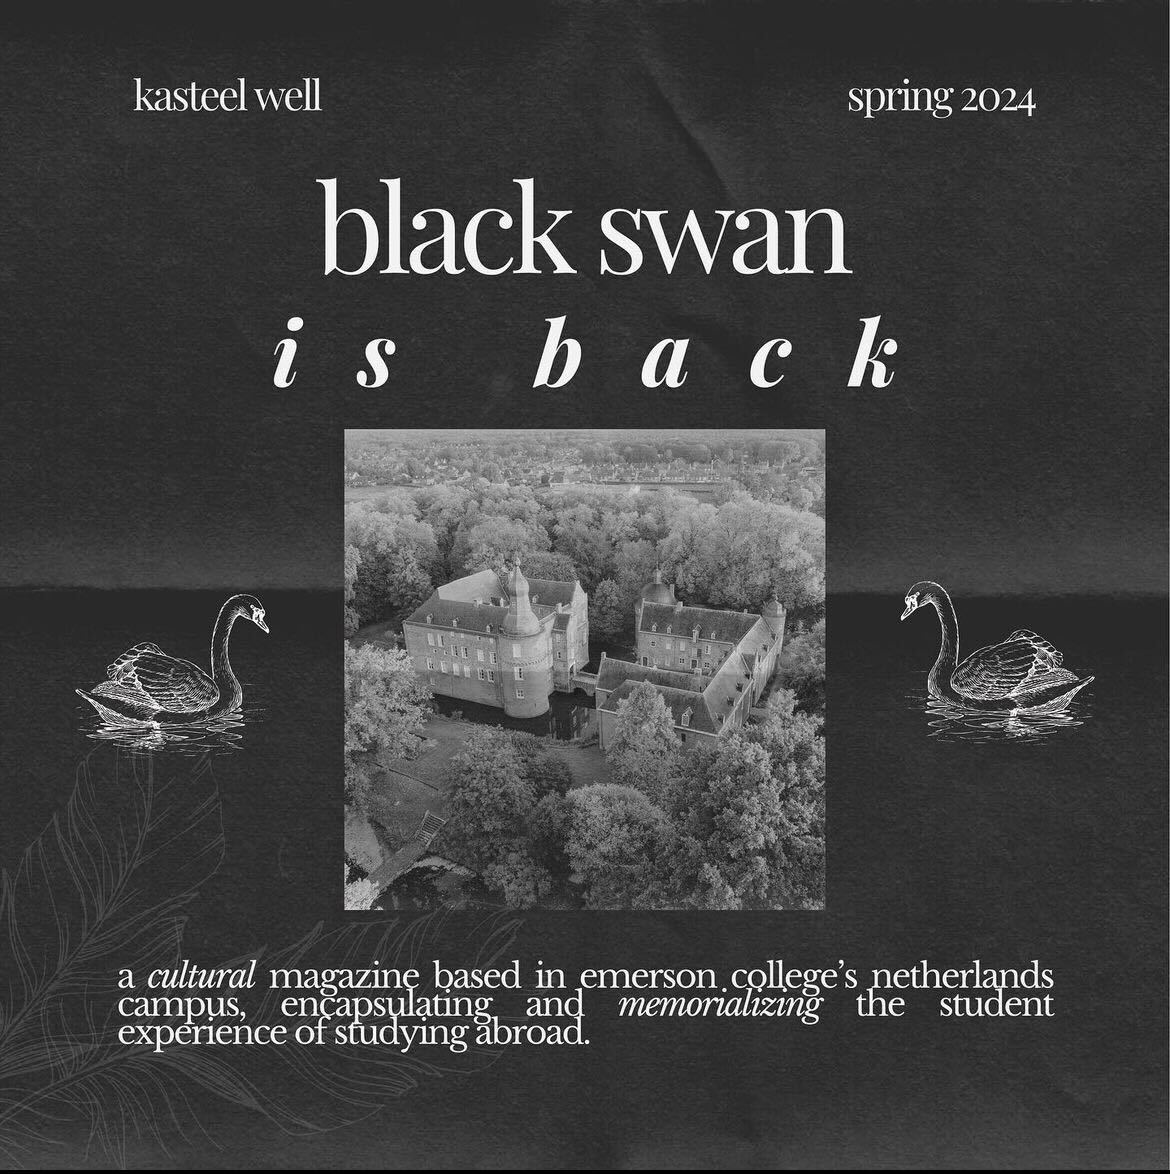 An+Instagram+post+announcing+the+return+of+Black+Swan+for+the+Spring+2024+semester.